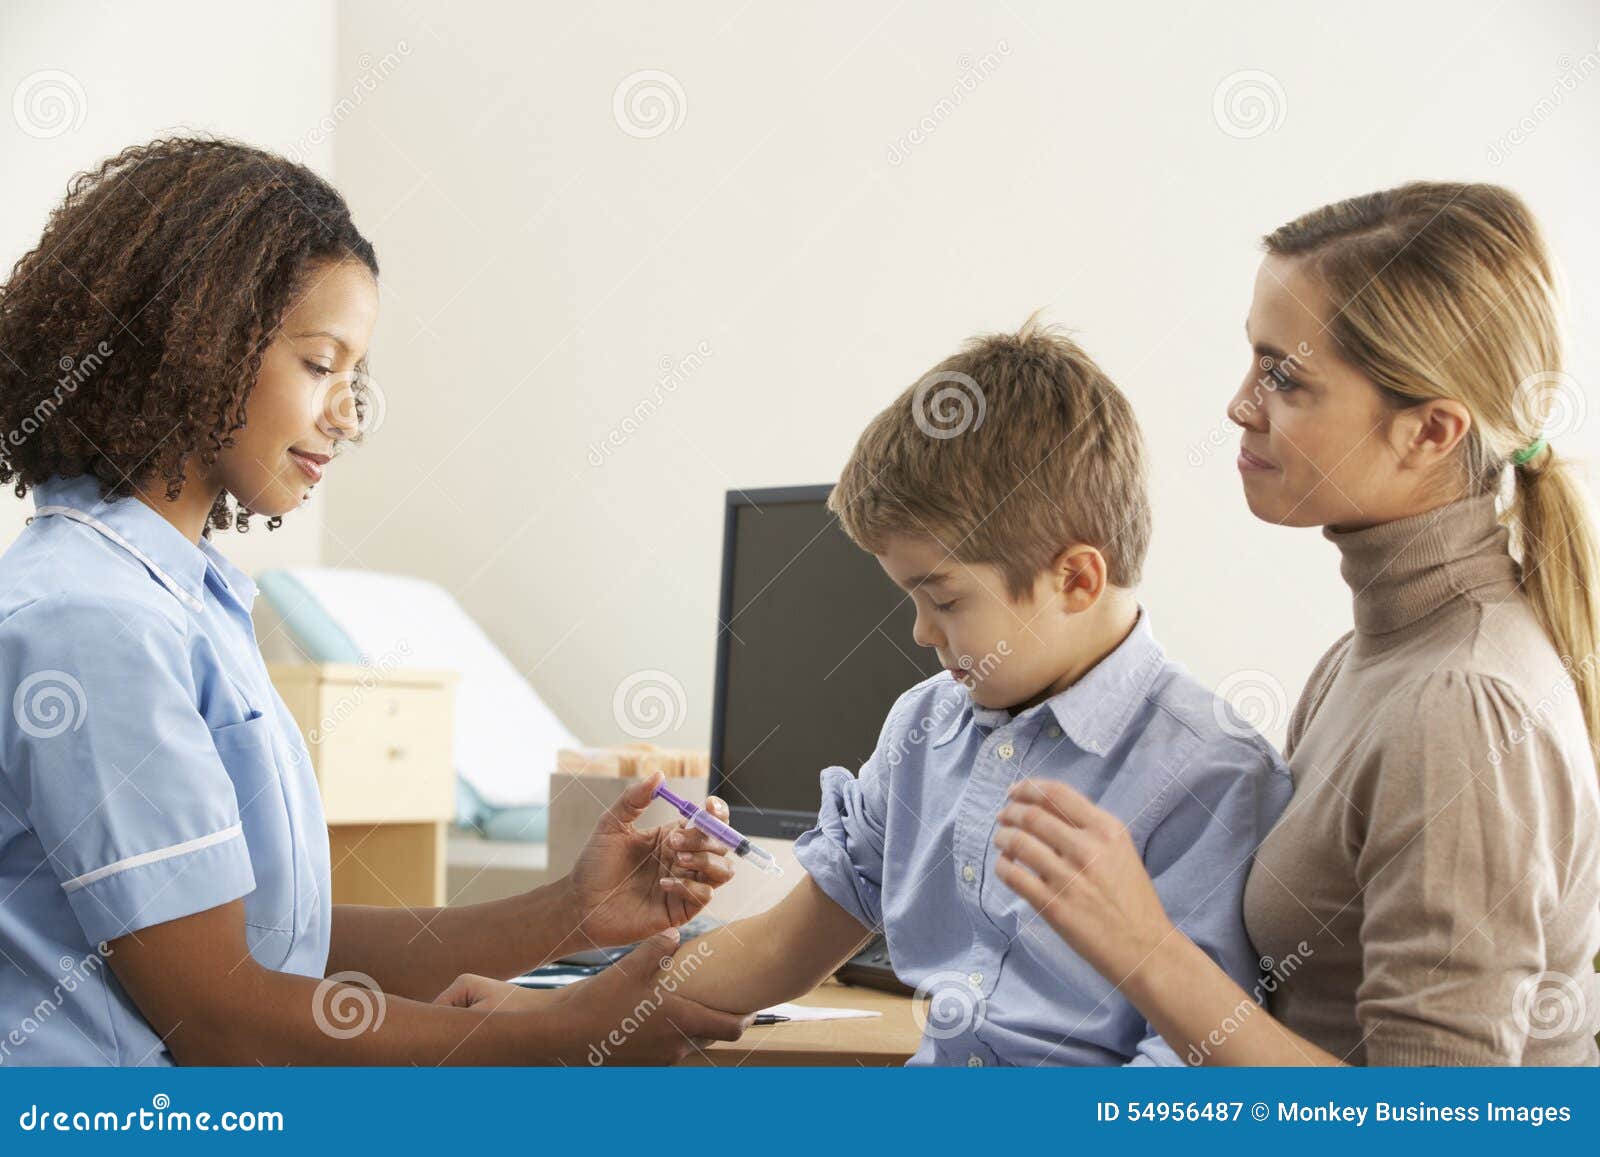 nurse injecting child with mother